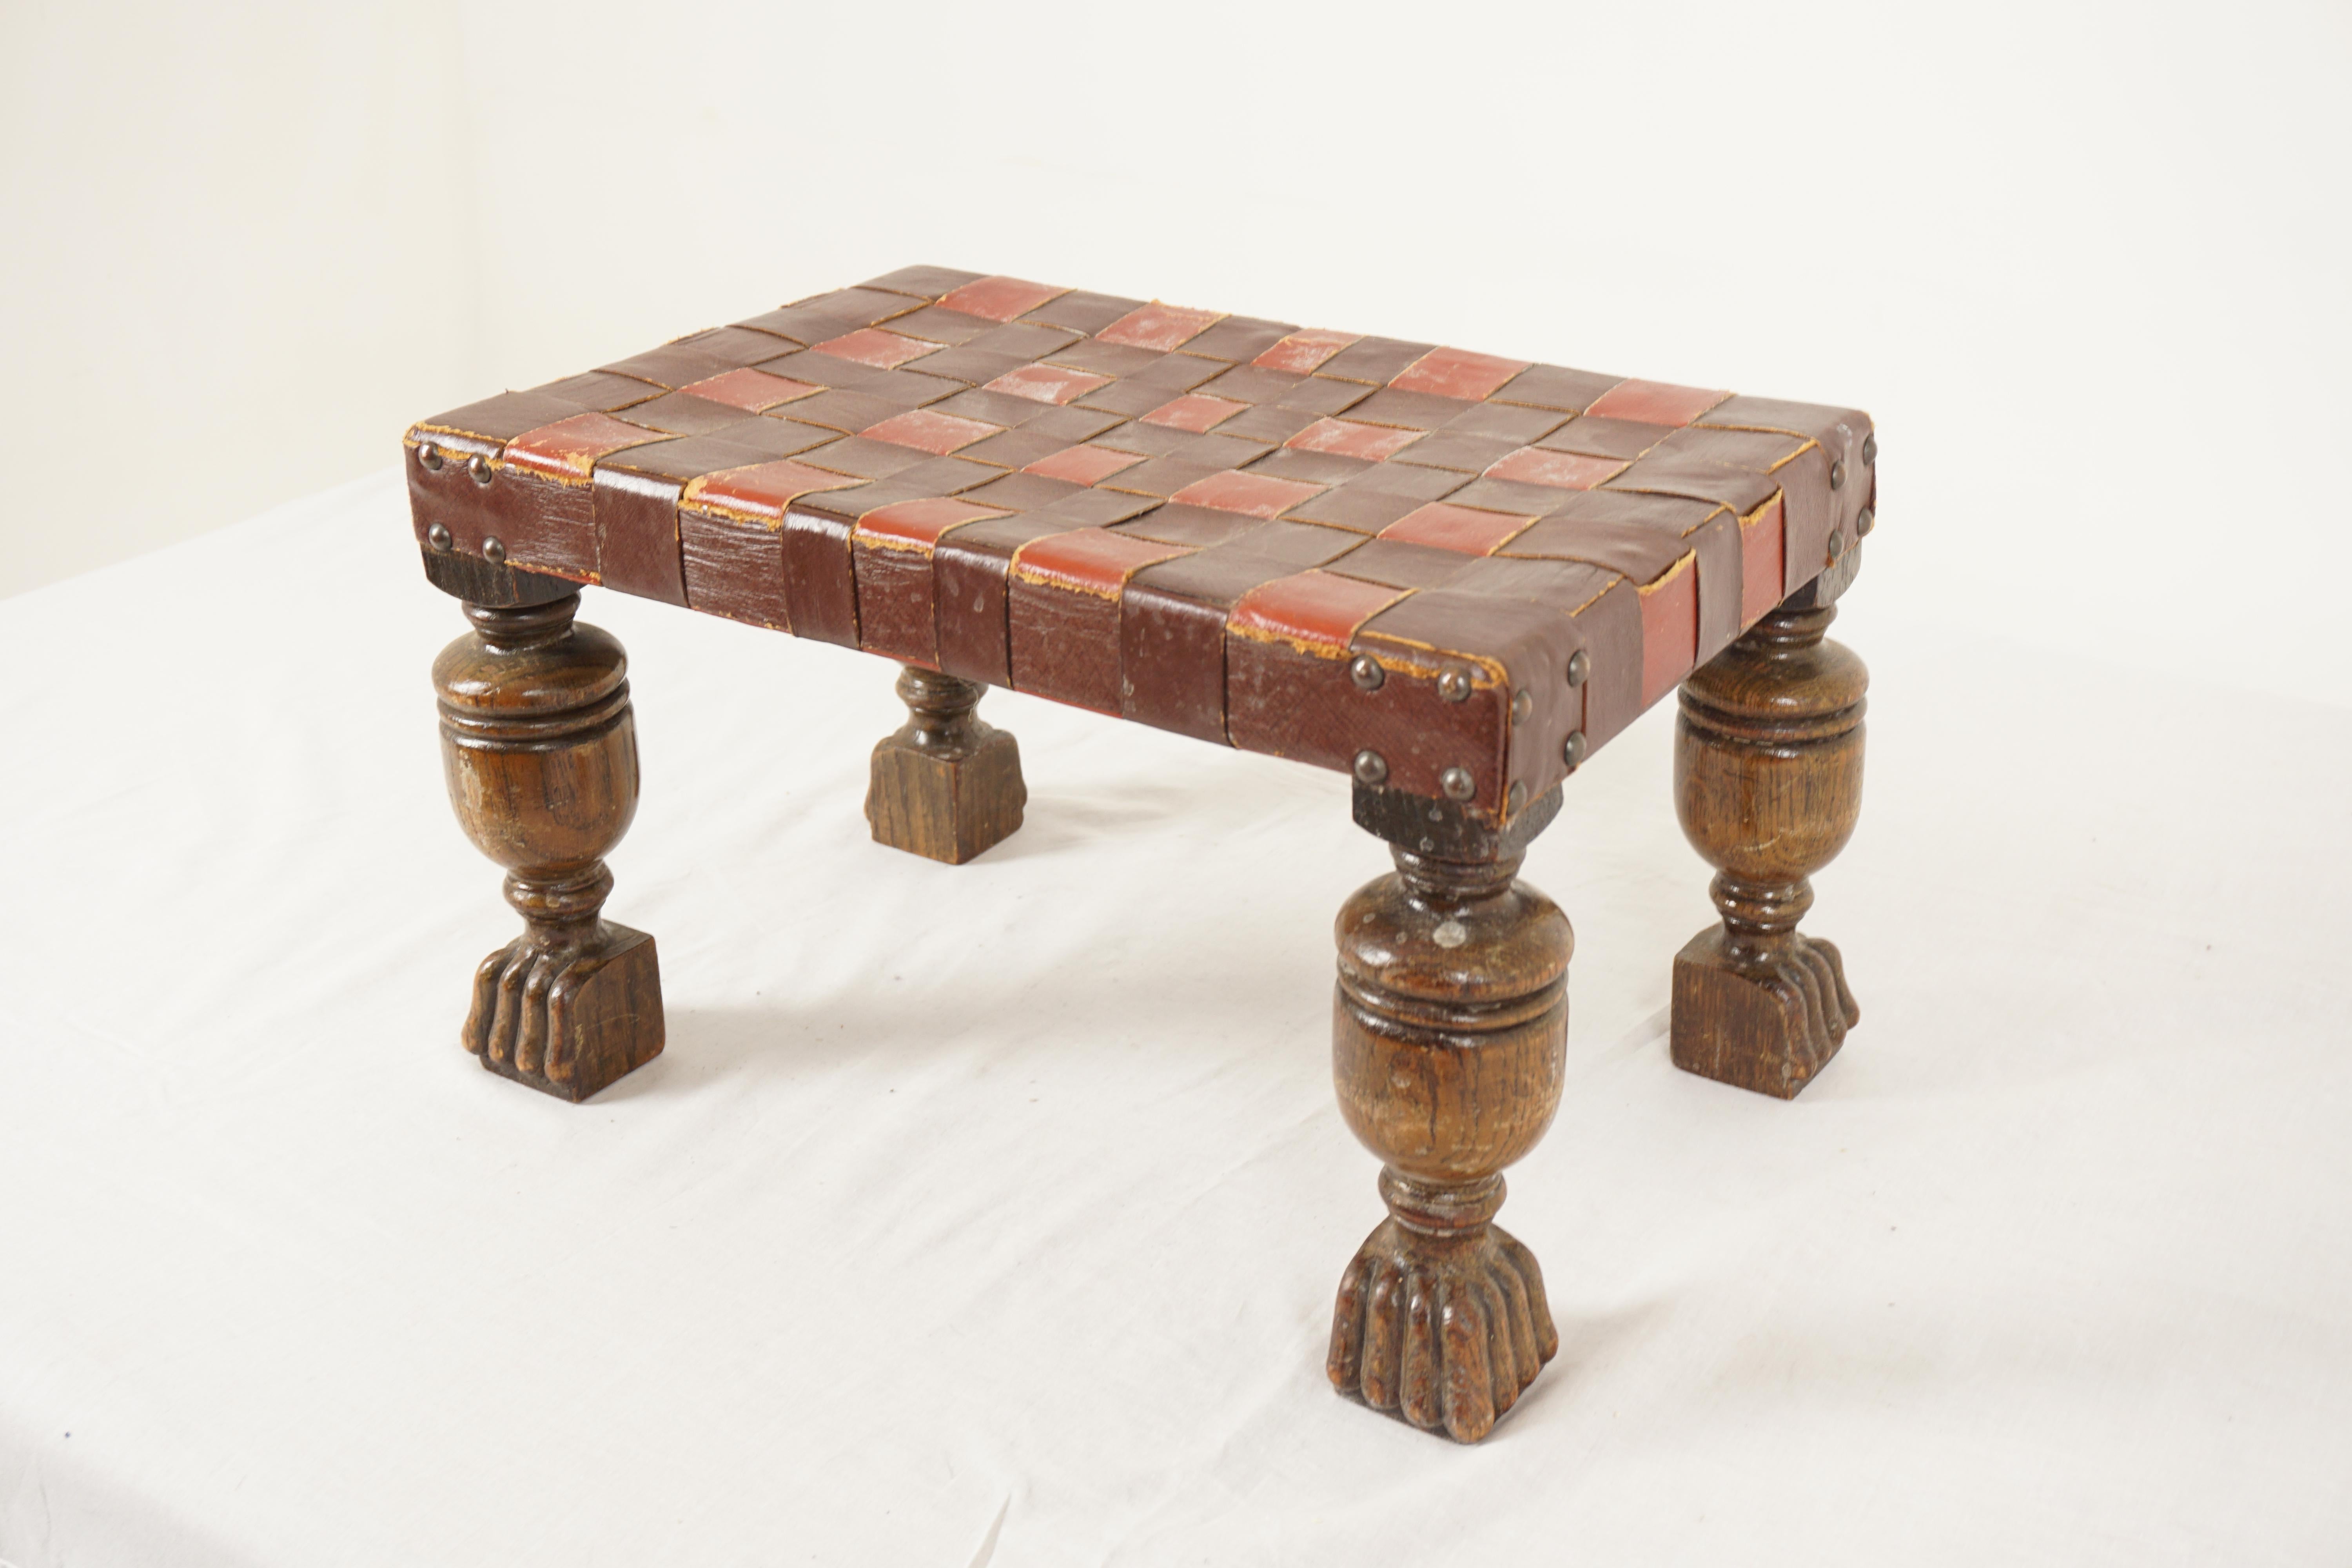 Antique Oak Bench, Vintage Leather Top Foot Stool, Foot Rest, Antique Furniture, Scotland 1930, H1081

+ Scotland 1930
+ Solid oak and leather
+ Leather top upholstery 
+ All standing on four thick bulbous legs with a carved foot base
+ All